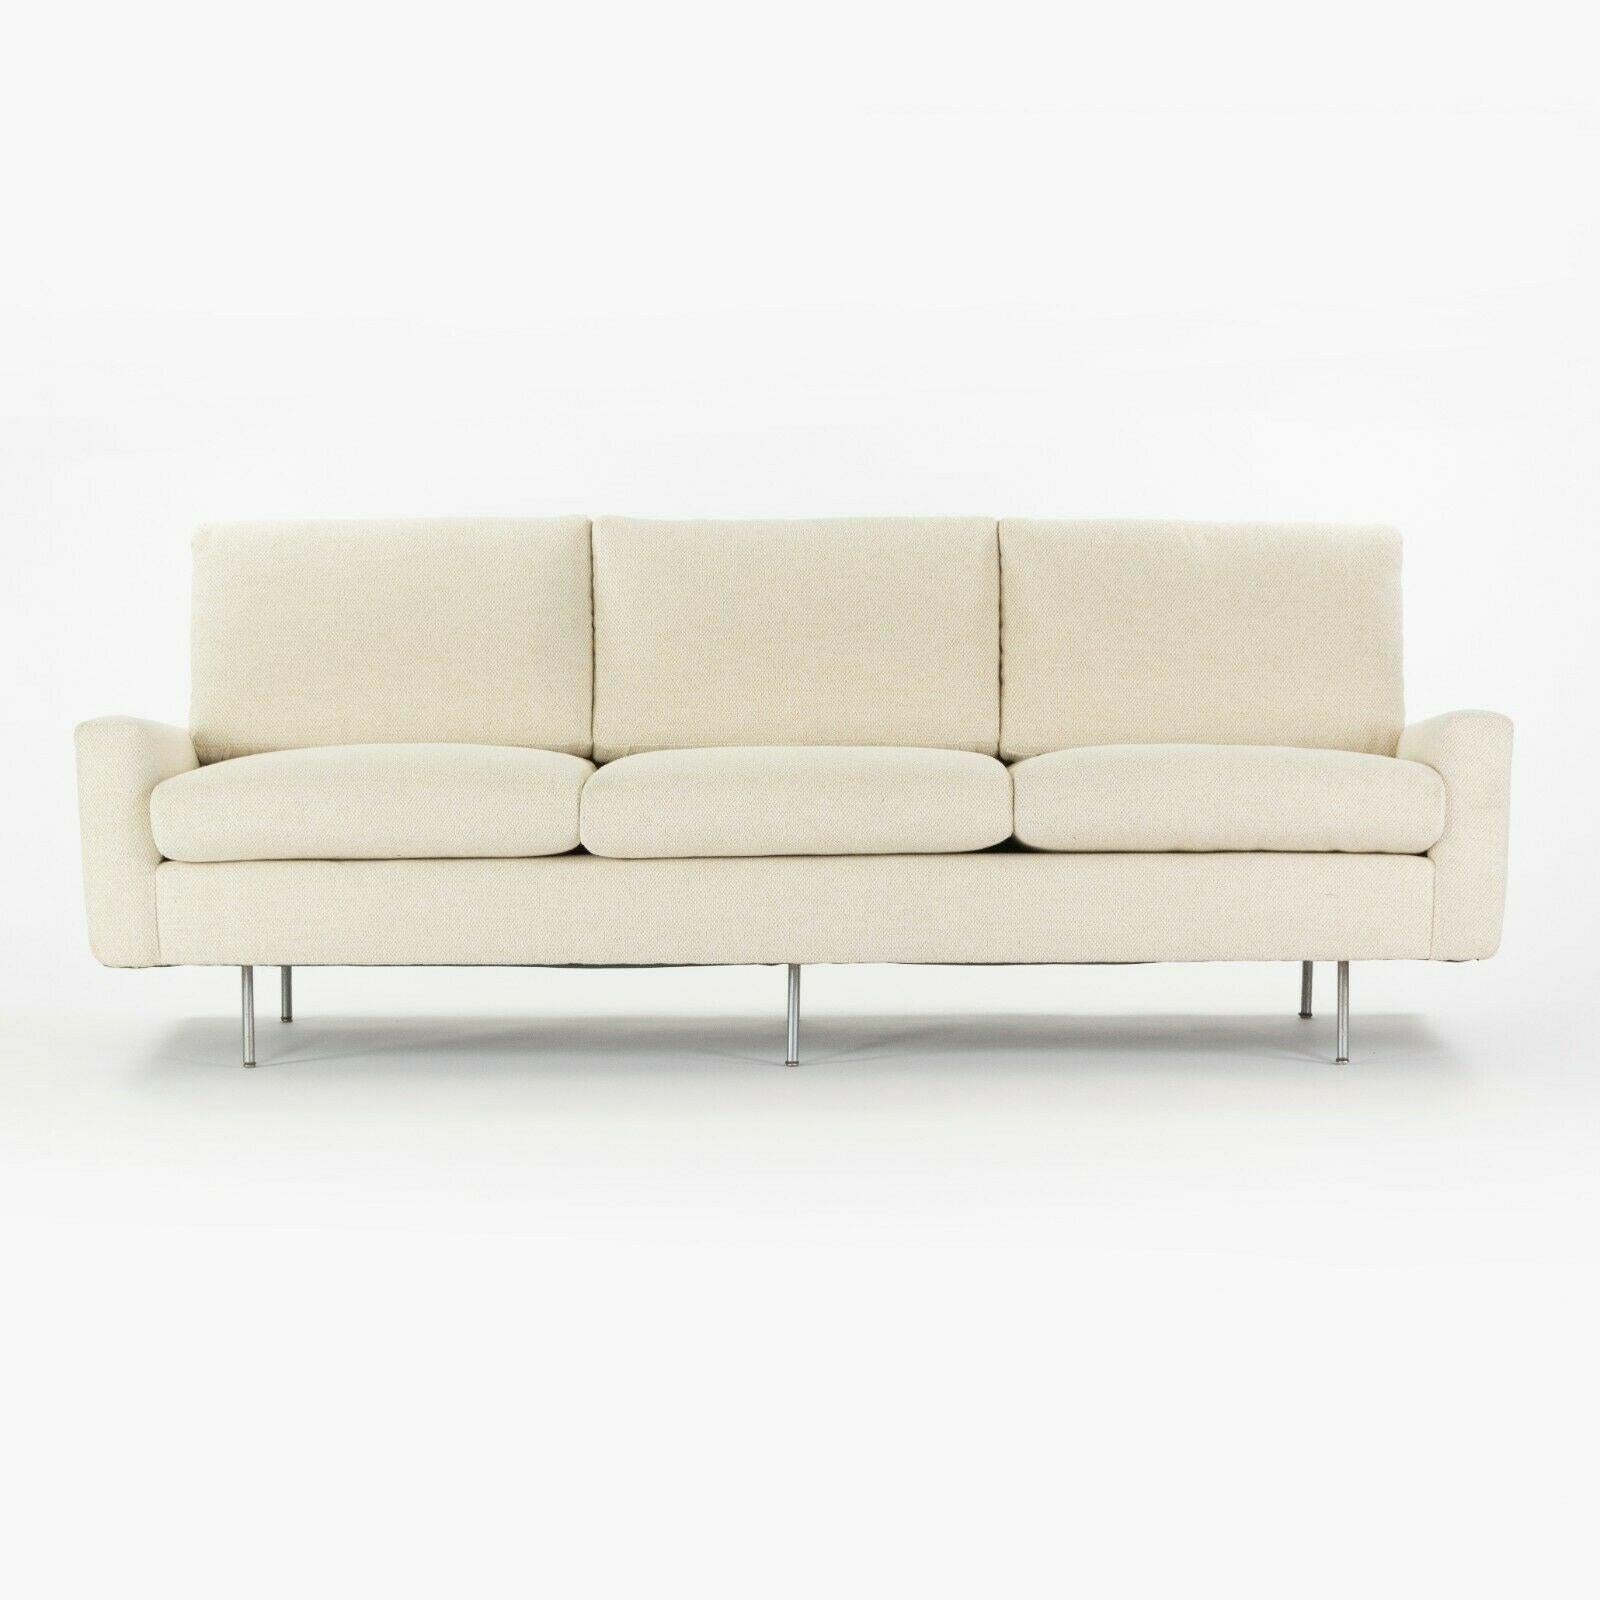 Listed for sale is a 1949 Florence Knoll for Knoll Associates 26 BC upholstered 3-seater sofa, which was just freshly reupholstered by Forthright, a renowned upholstery shop based in NYC and Connecticut. This example is in gorgeous condition,